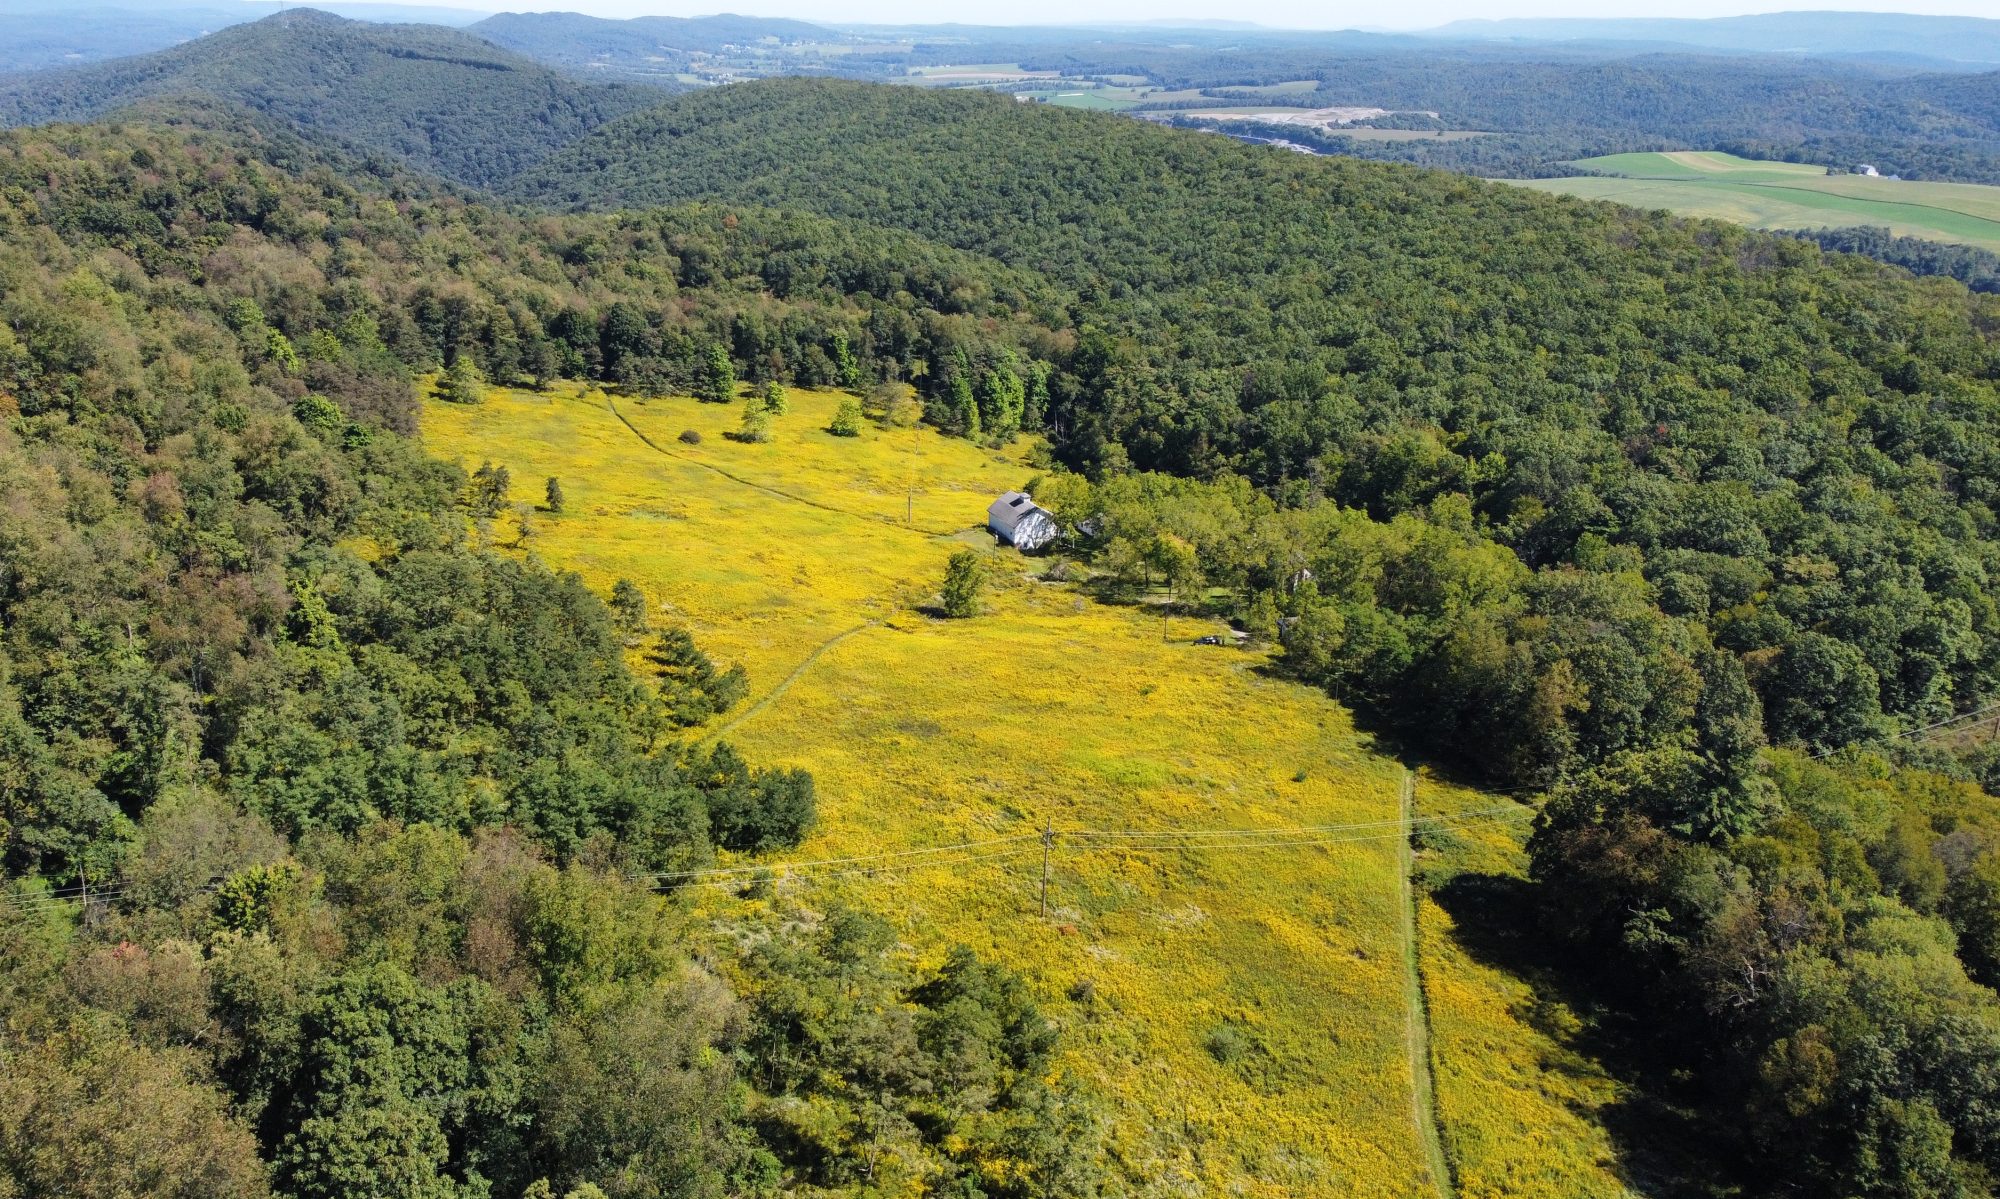 An aerial view of a mountaintop meadow, yellow with goldenrod, and the surrounding forest